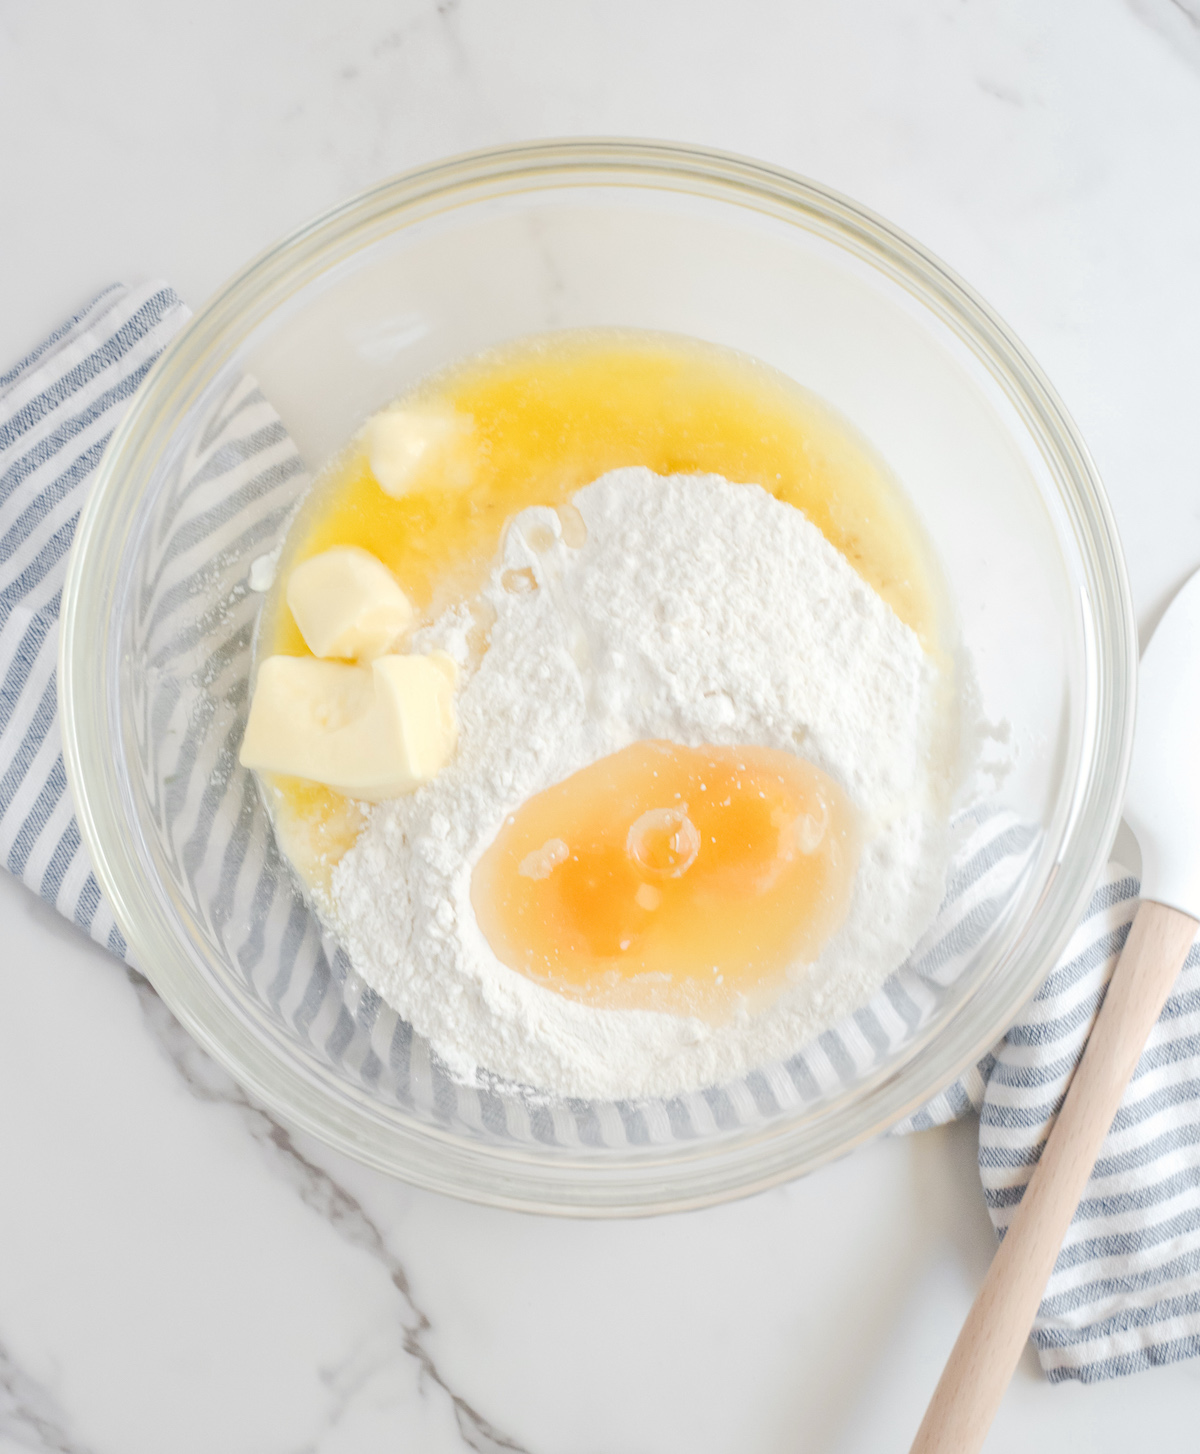 Cake mix, butter, and eggs combined in a bowl